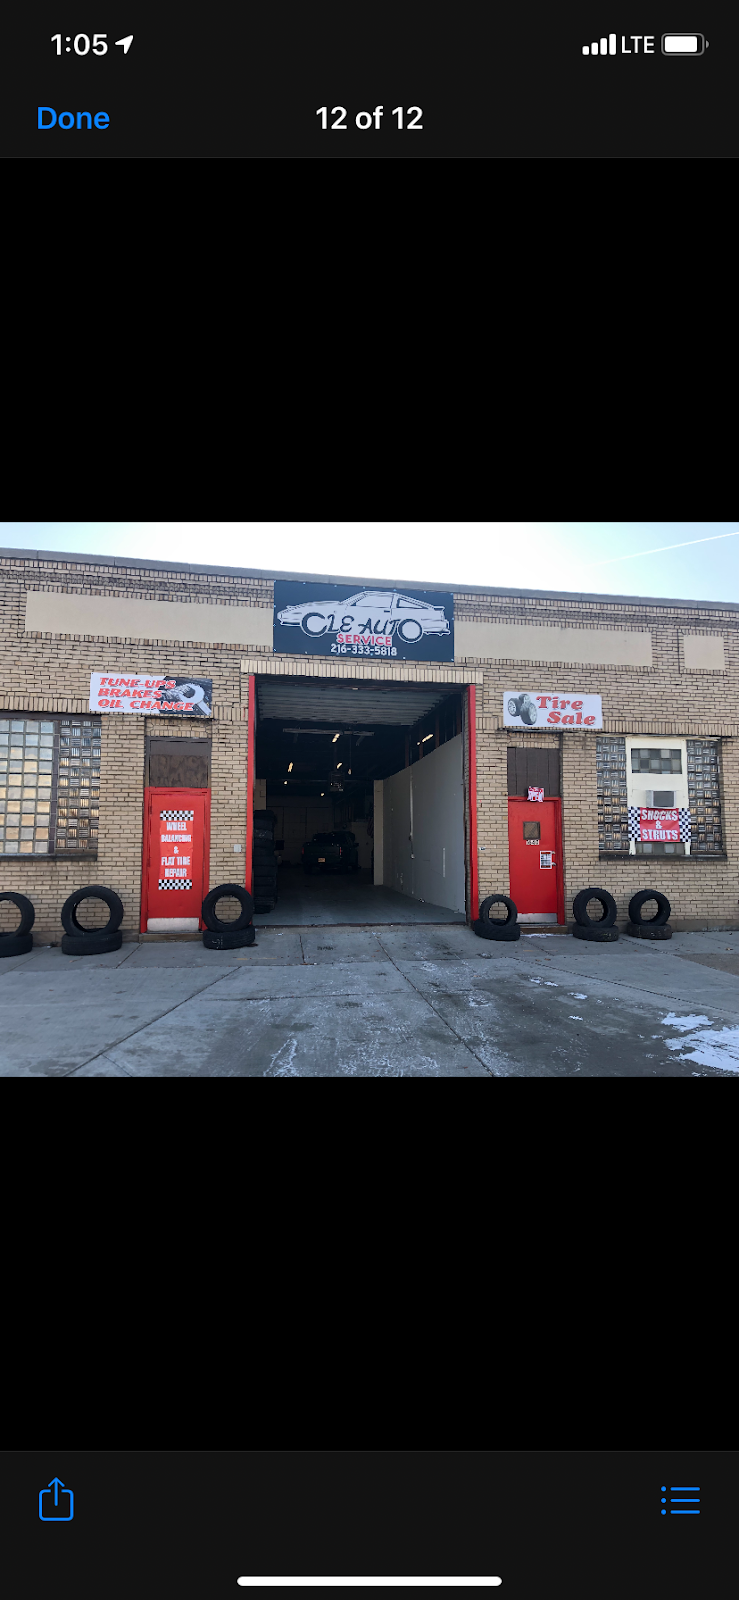 CLE Auto Service | 1640 St Clair Ave NE, Cleveland, OH 44114 | Phone: (216) 333-5818